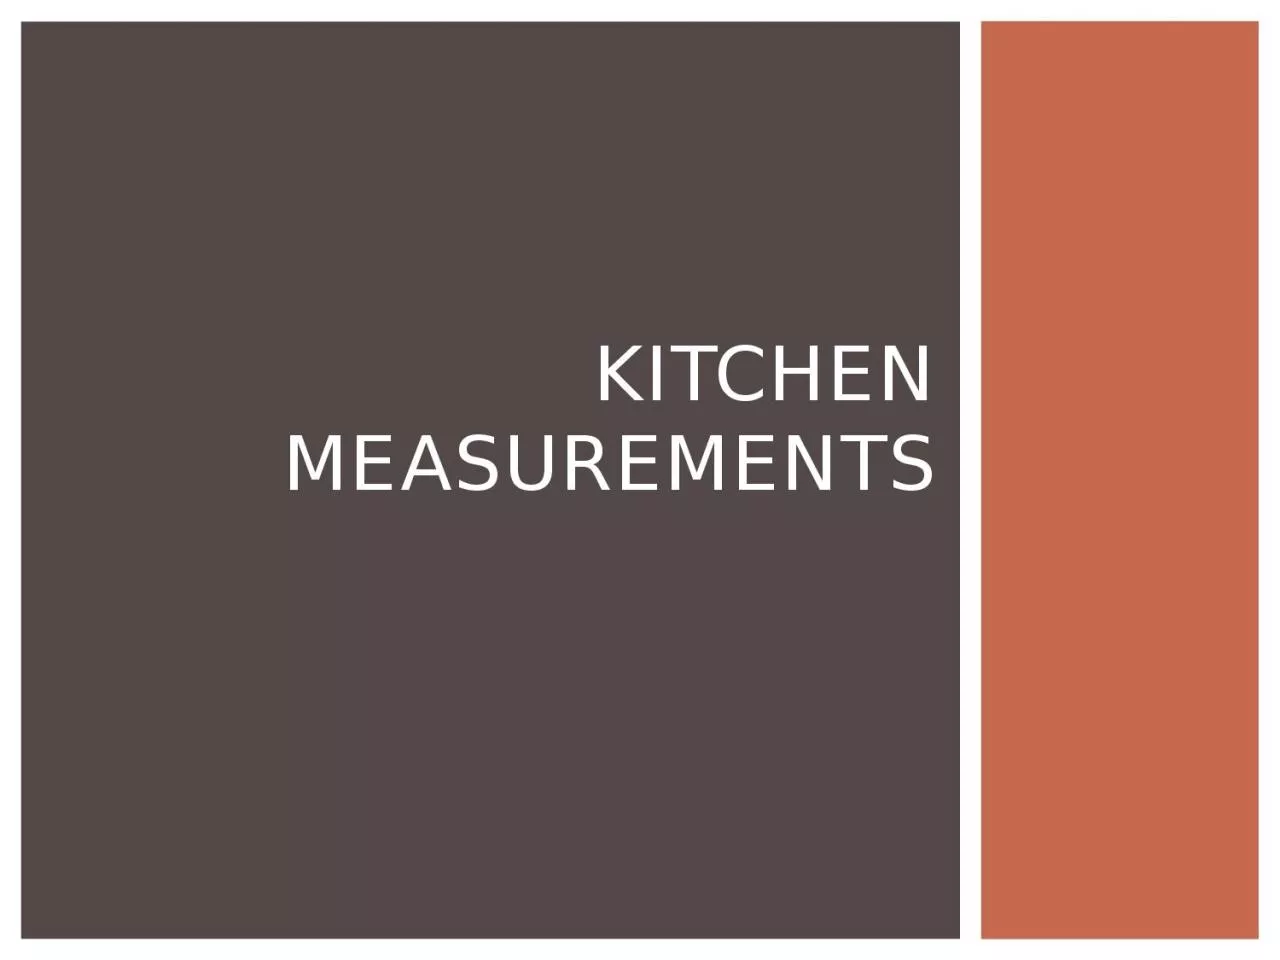 Kitchen Measurements List at least 3 things that are measured in the world that are essential